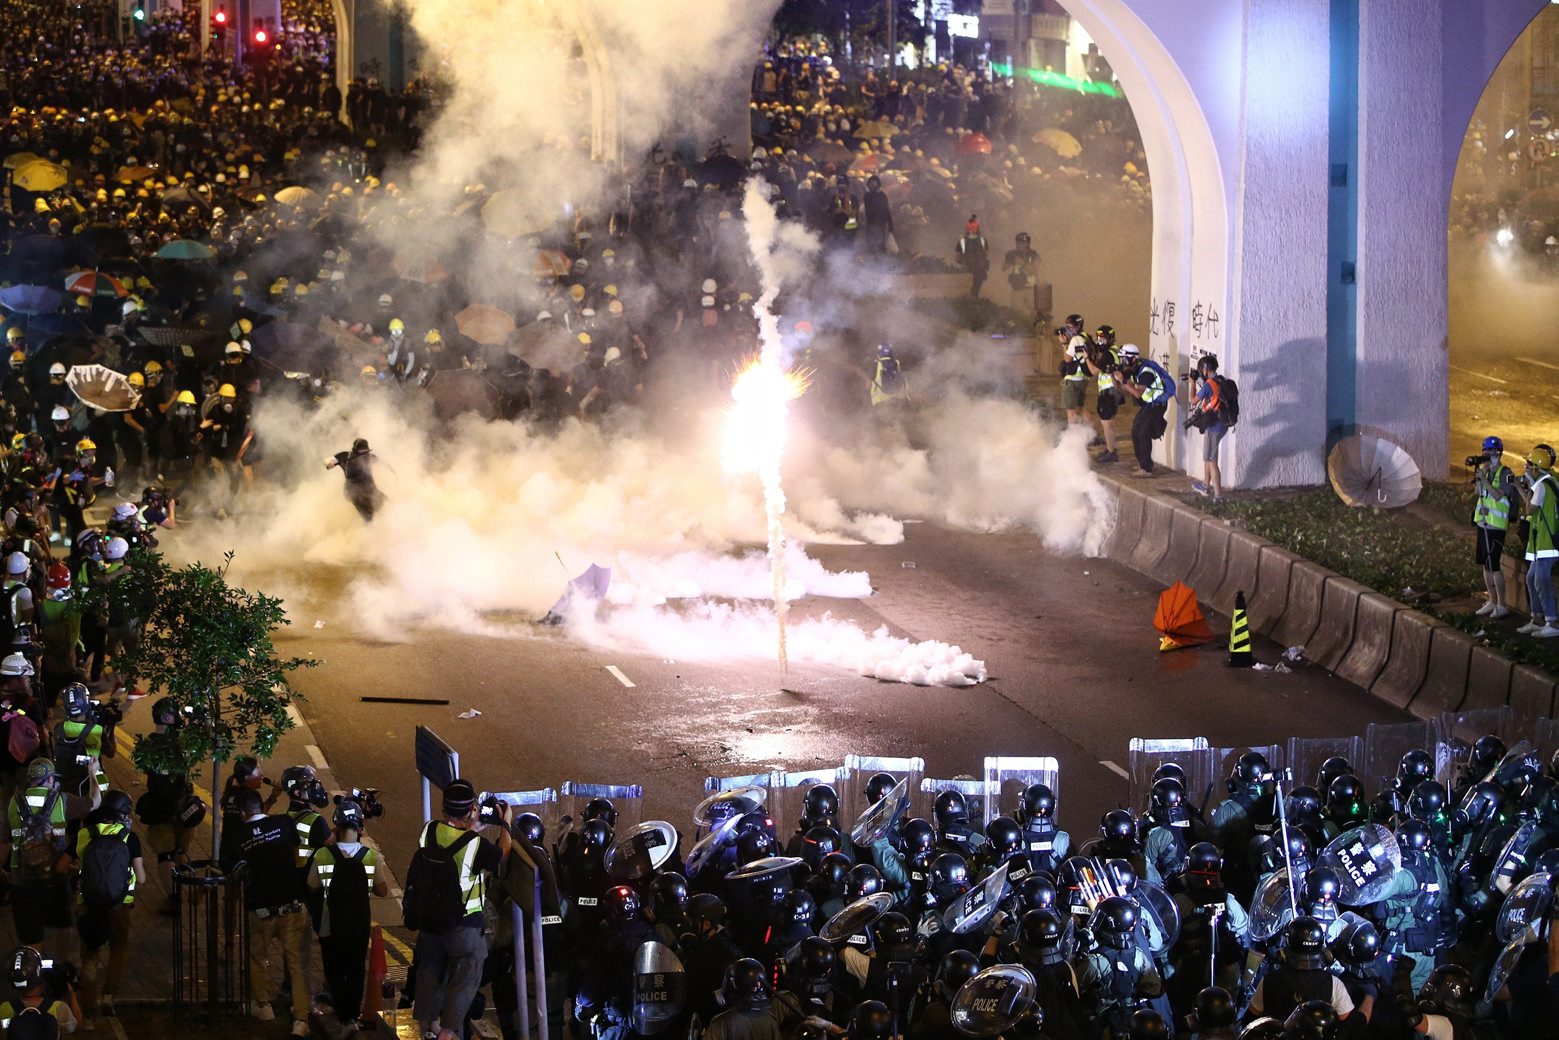 Protesters are engulfed by teargas during a confrontation with riot police in Hong Kong Sunday, July 21, 2019. Hong Kong police launched tear gas at protesters Sunday after a massive pro-democracy march continued late into the evening. The action was the latest confrontation between police and demonstrators who have taken to the streets to protest an extradition bill and call for electoral reforms in the Chinese territory. (Lo Kwanho/HK01 via AP) Hong Kong Protests